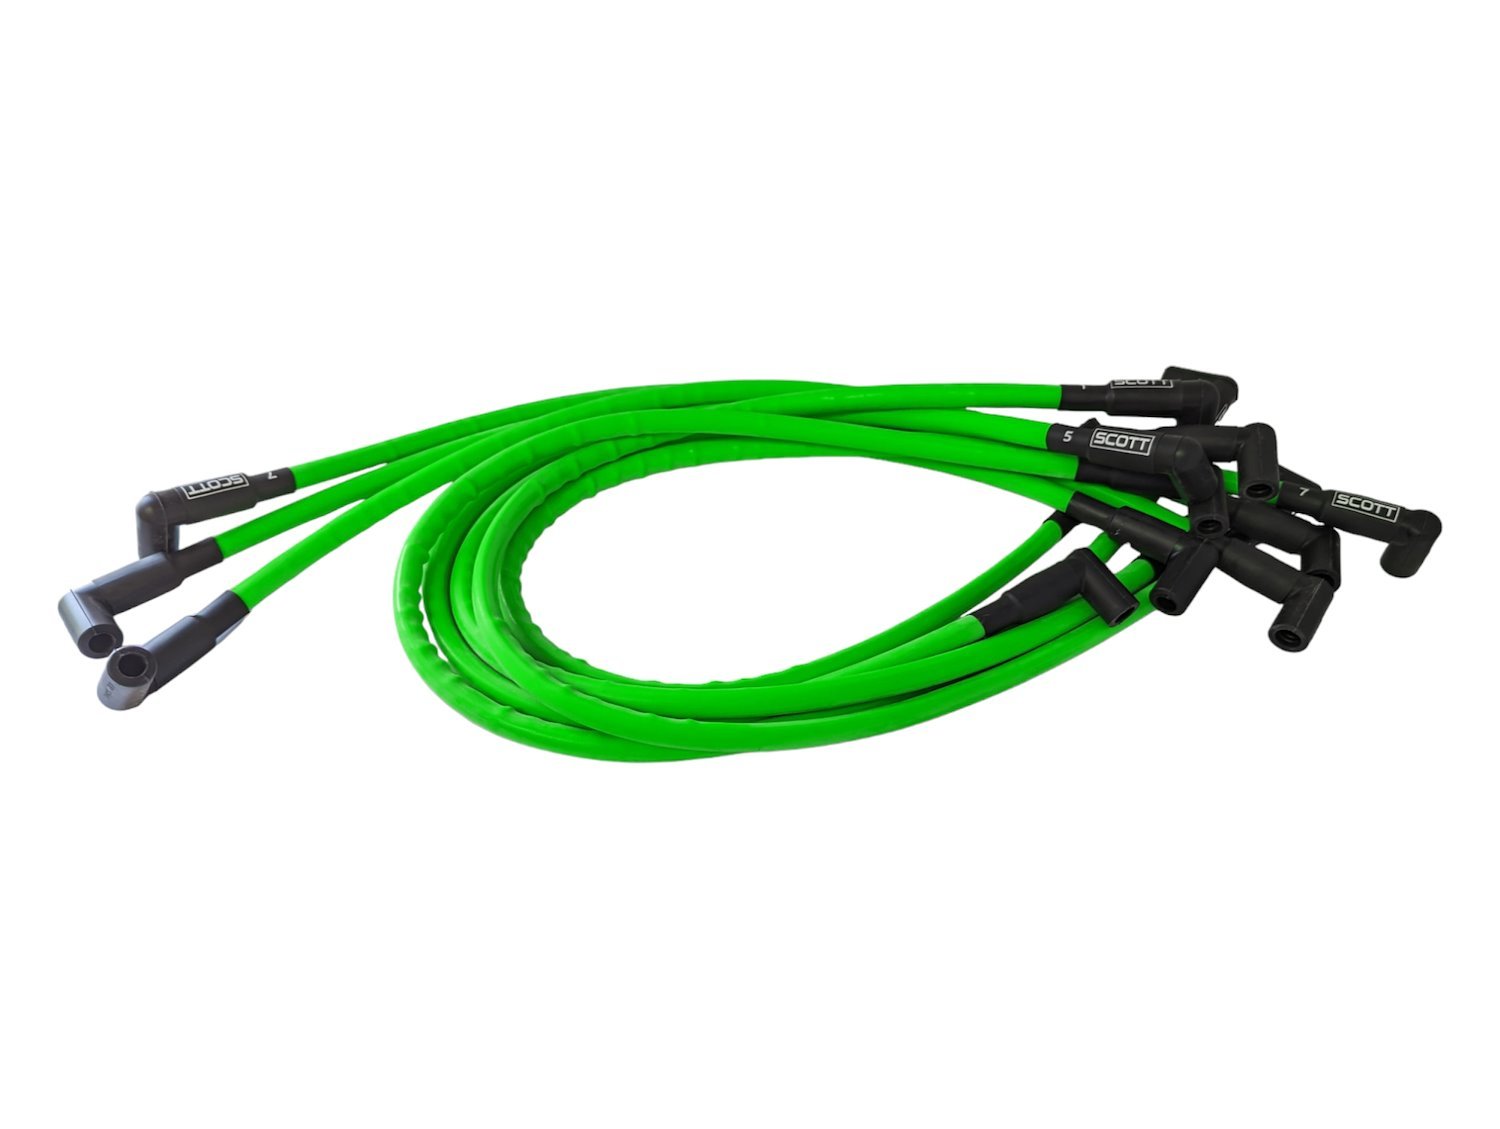 SPW-CH-430-8 High-Performance Silicone-Sleeved Spark Plug Wire Set for Big Block Ford, Under Header [Fluorescent Green]